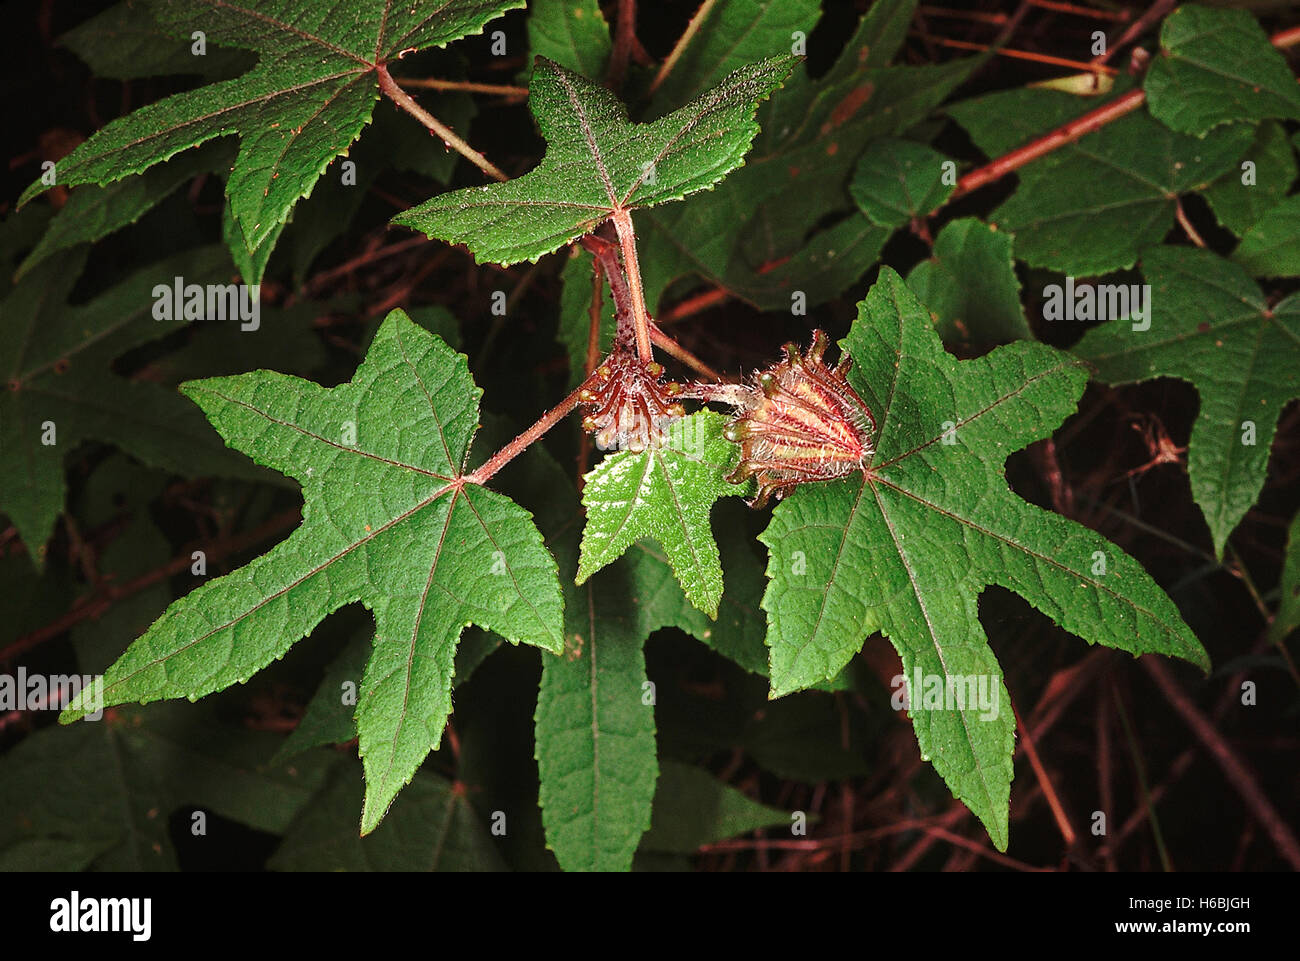 Family: Malvaceae, Hibiscus sp. - calyx and epicalyx. A climbing Hibiscus with hooked prickles on the stem.. Stock Photo